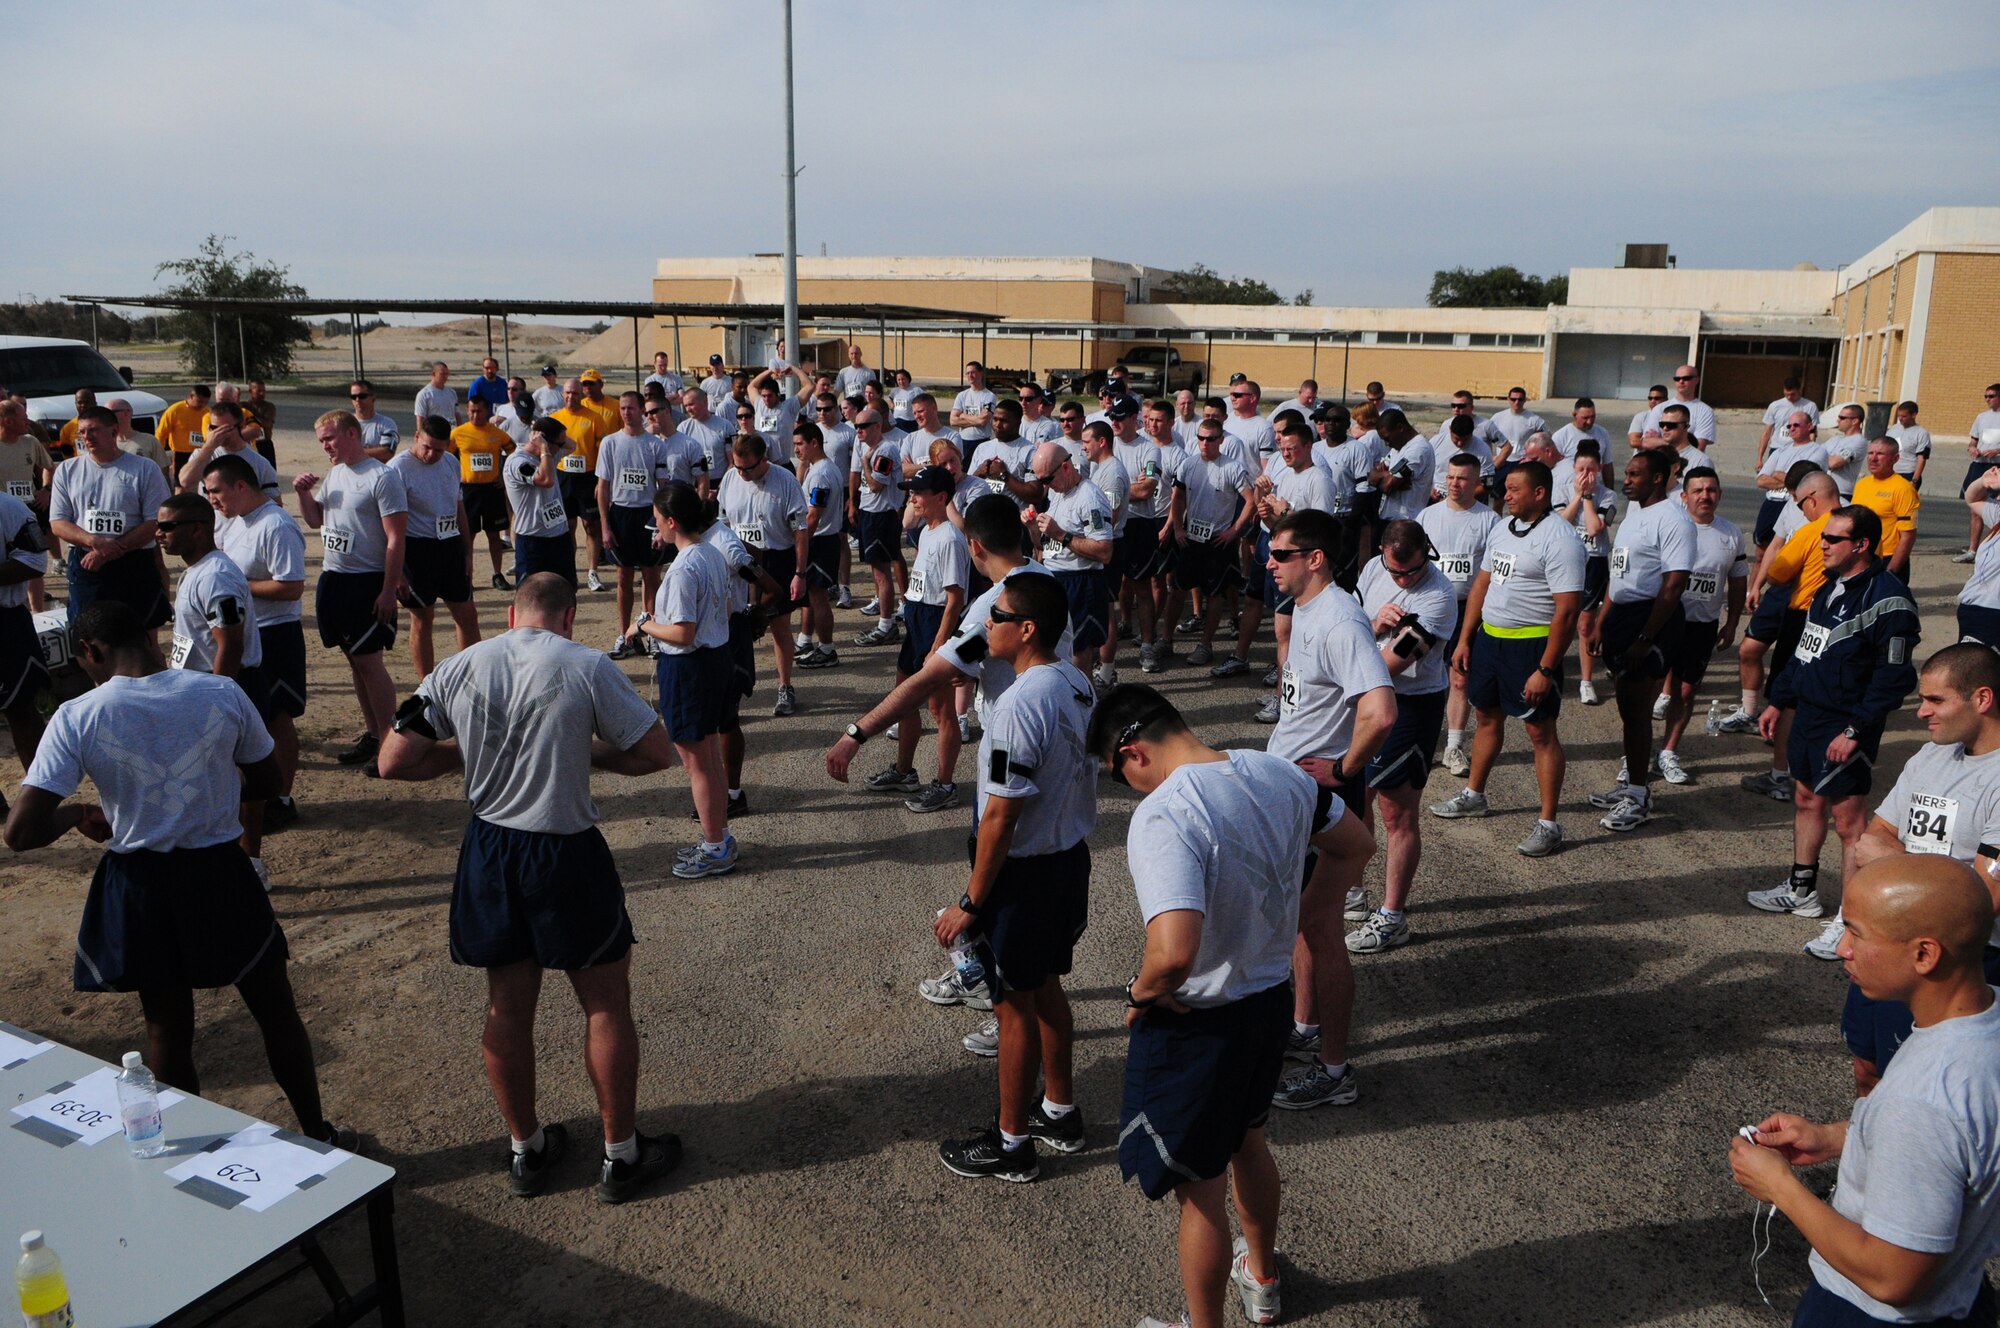 Armed Forces MLK run participants gather before the start of the event Jan. 18, 2010 at an air base in Southwest Asia. About 150 servicemembers, Department of Defense civilian and contract personnel and coalition partners participated in the 10- and 5-kilometer race honoring Martin Luther King Jr. The event was sponsored by HFP Racing. (U.S. Air Force photo by Staff Sgt. Robert Sizelove/Released)